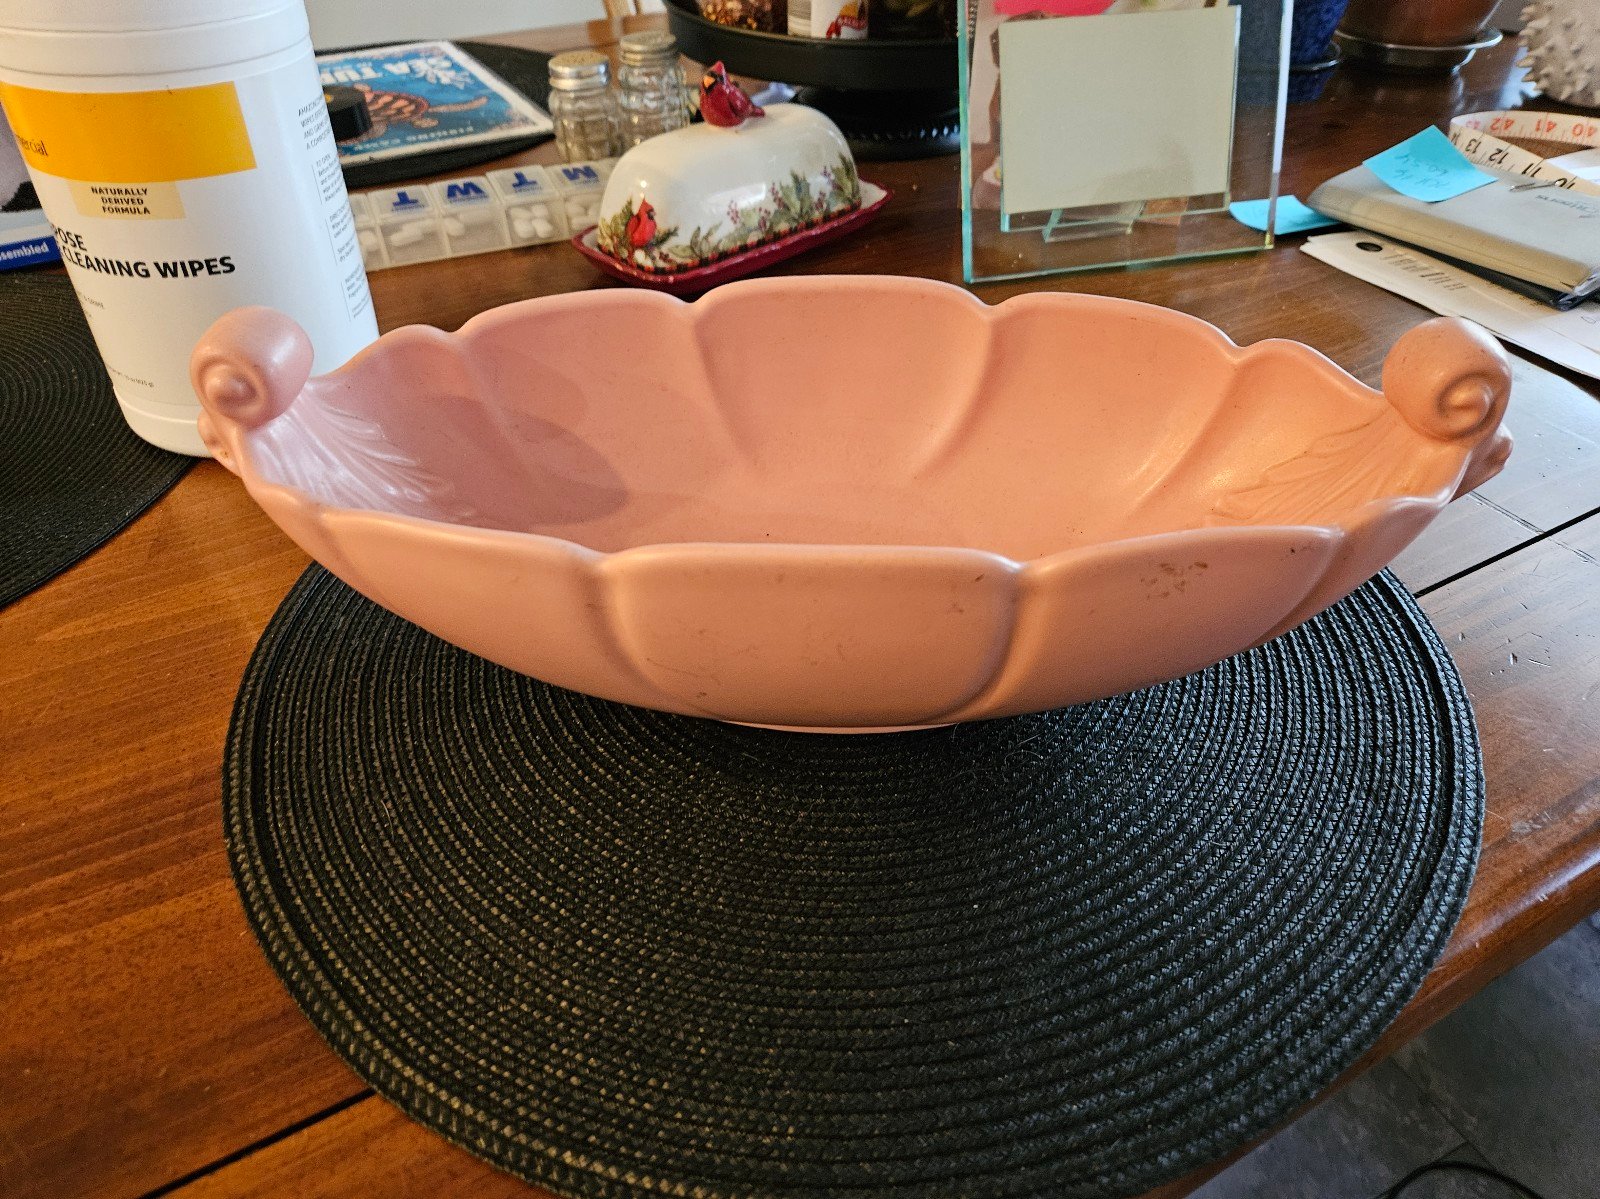 Pink Abingdon Pottery USA Large Oval Planter perfect for Succulents vintage lOVTFTcjO